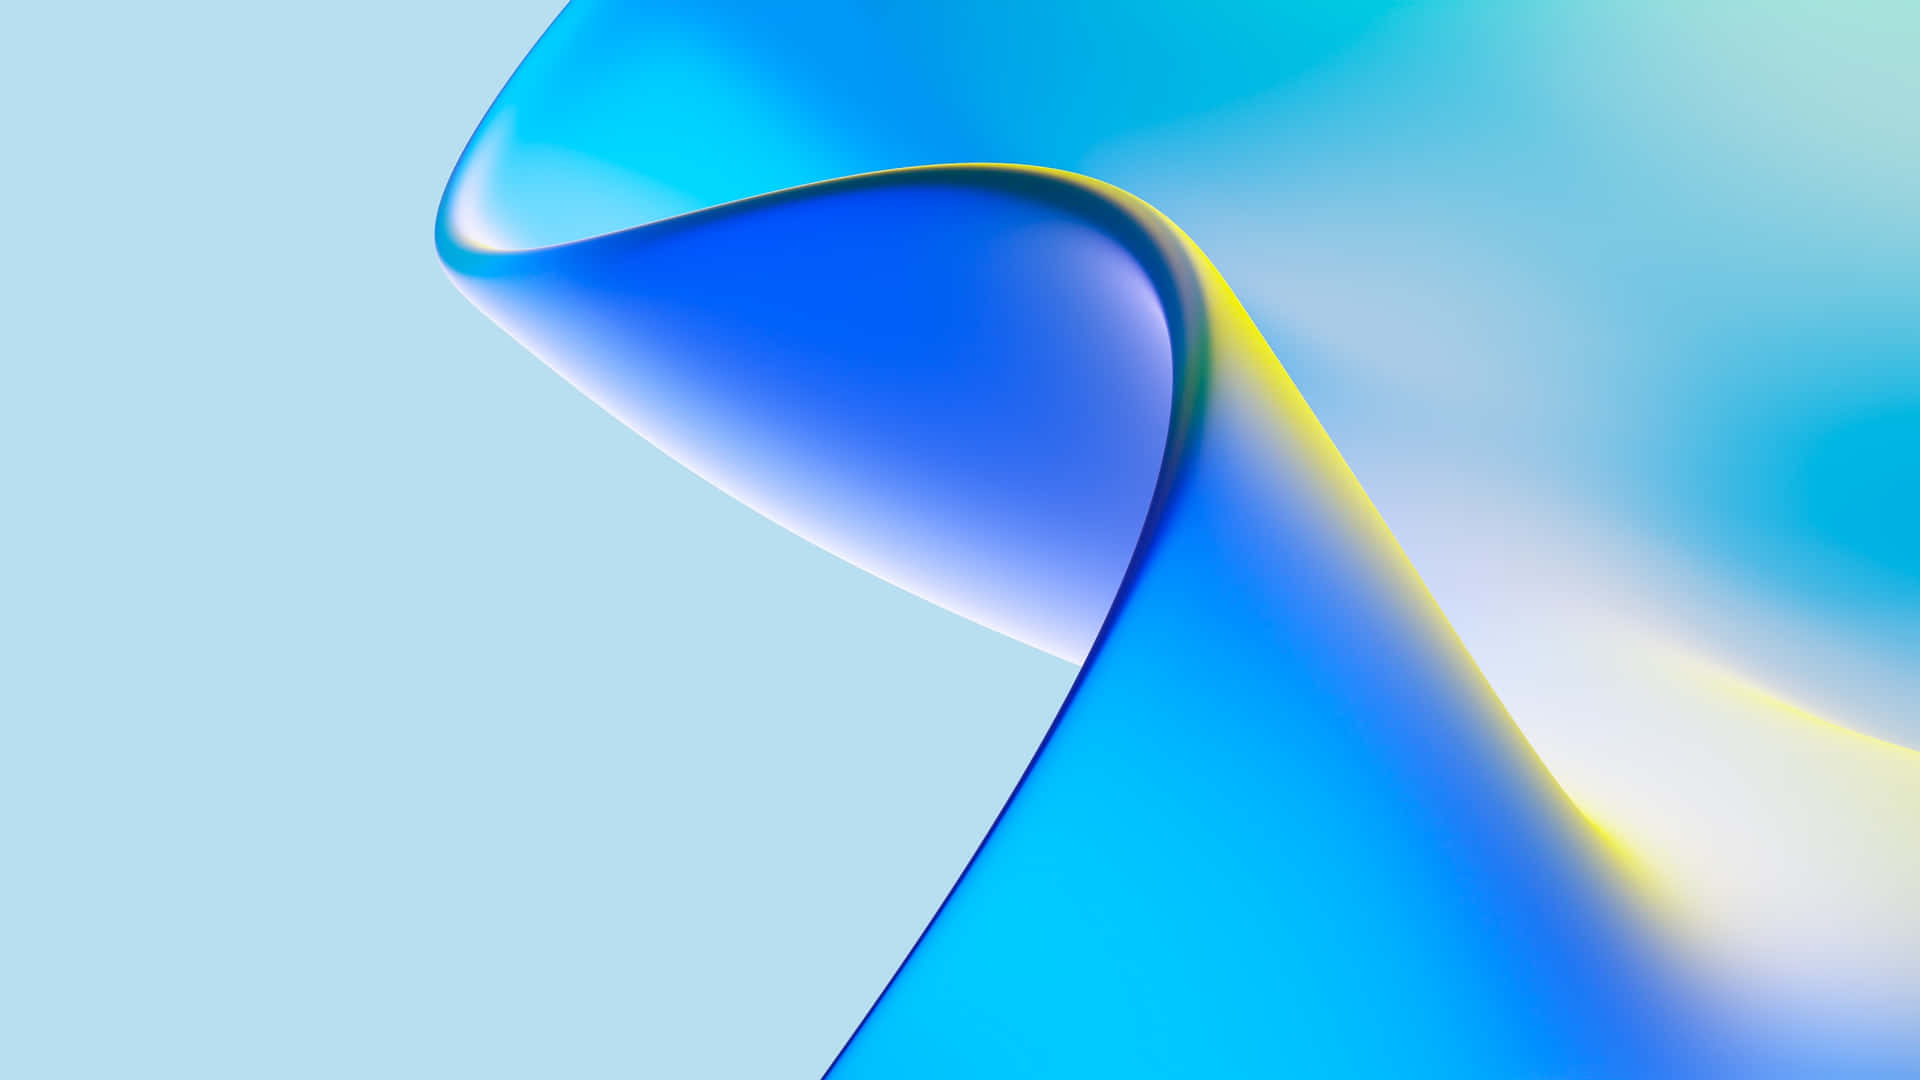 Brighten up your day with a brilliant blue abstract background